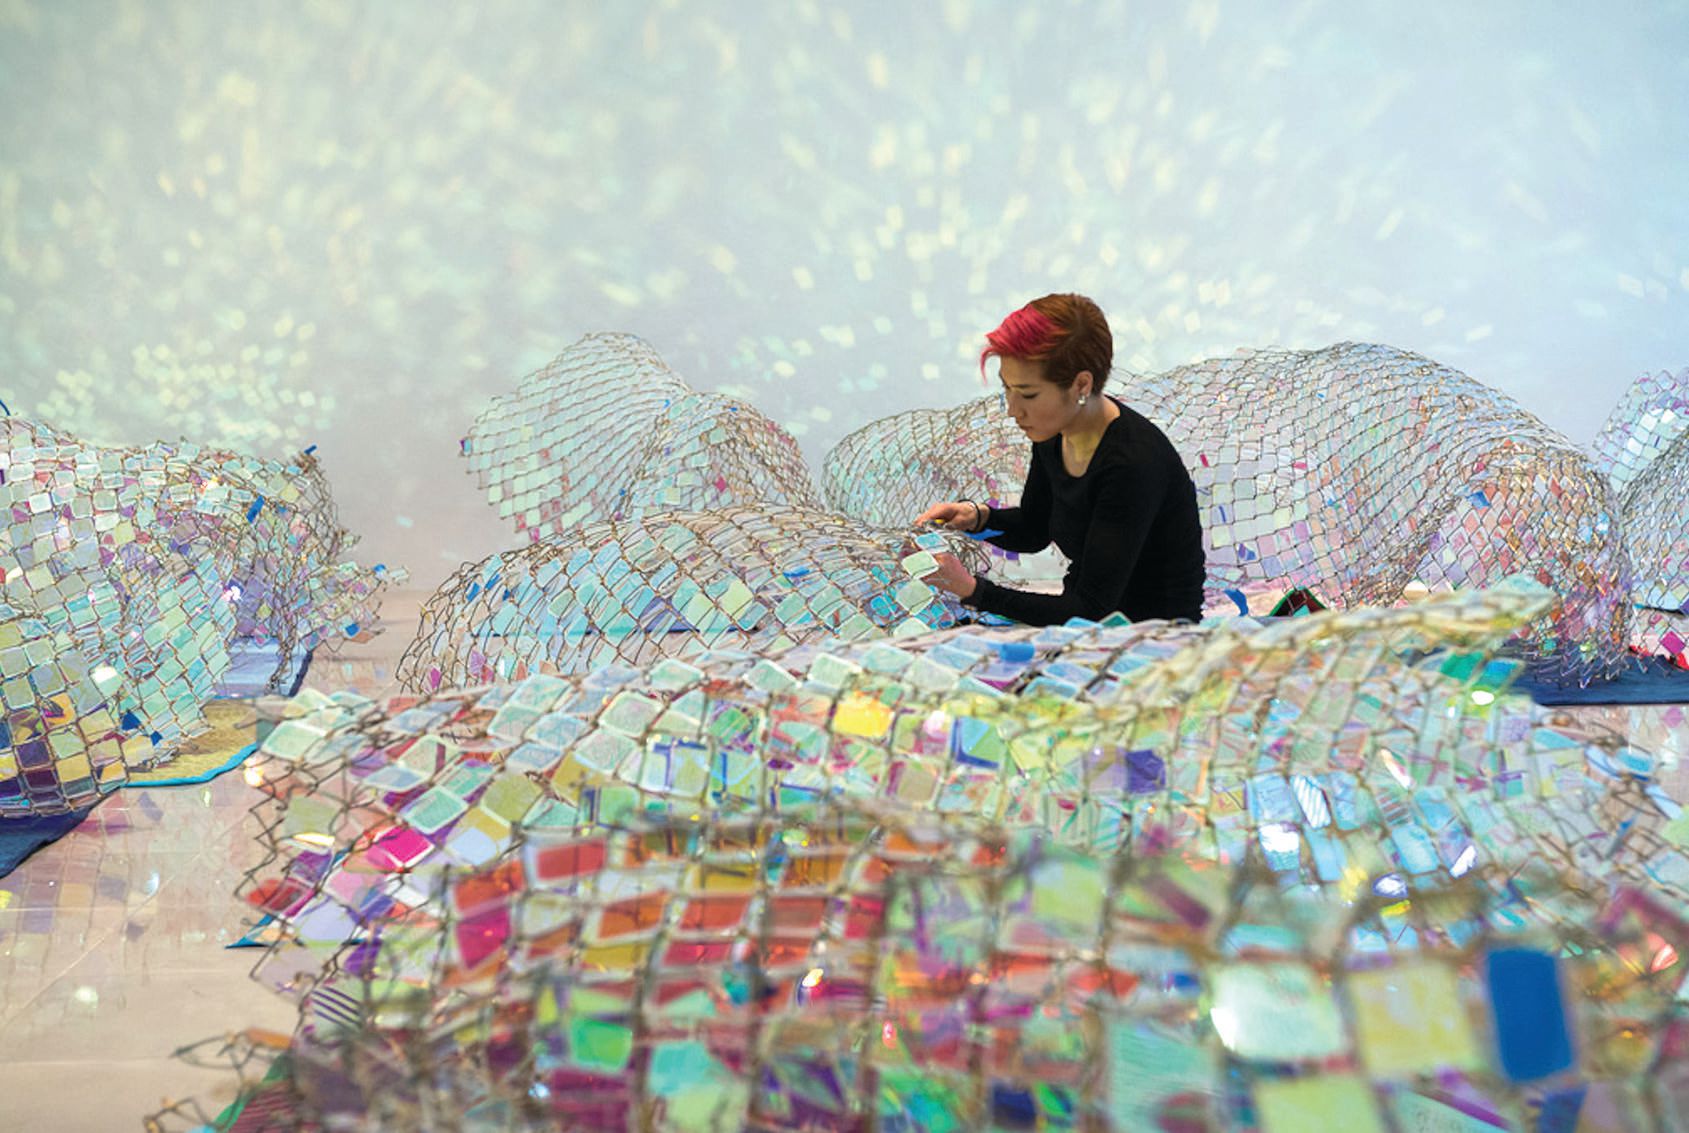 Artist Soo Sunny Park works on the installation of her new exhibit in San Jose. PHOTO BY: NASH BAKER